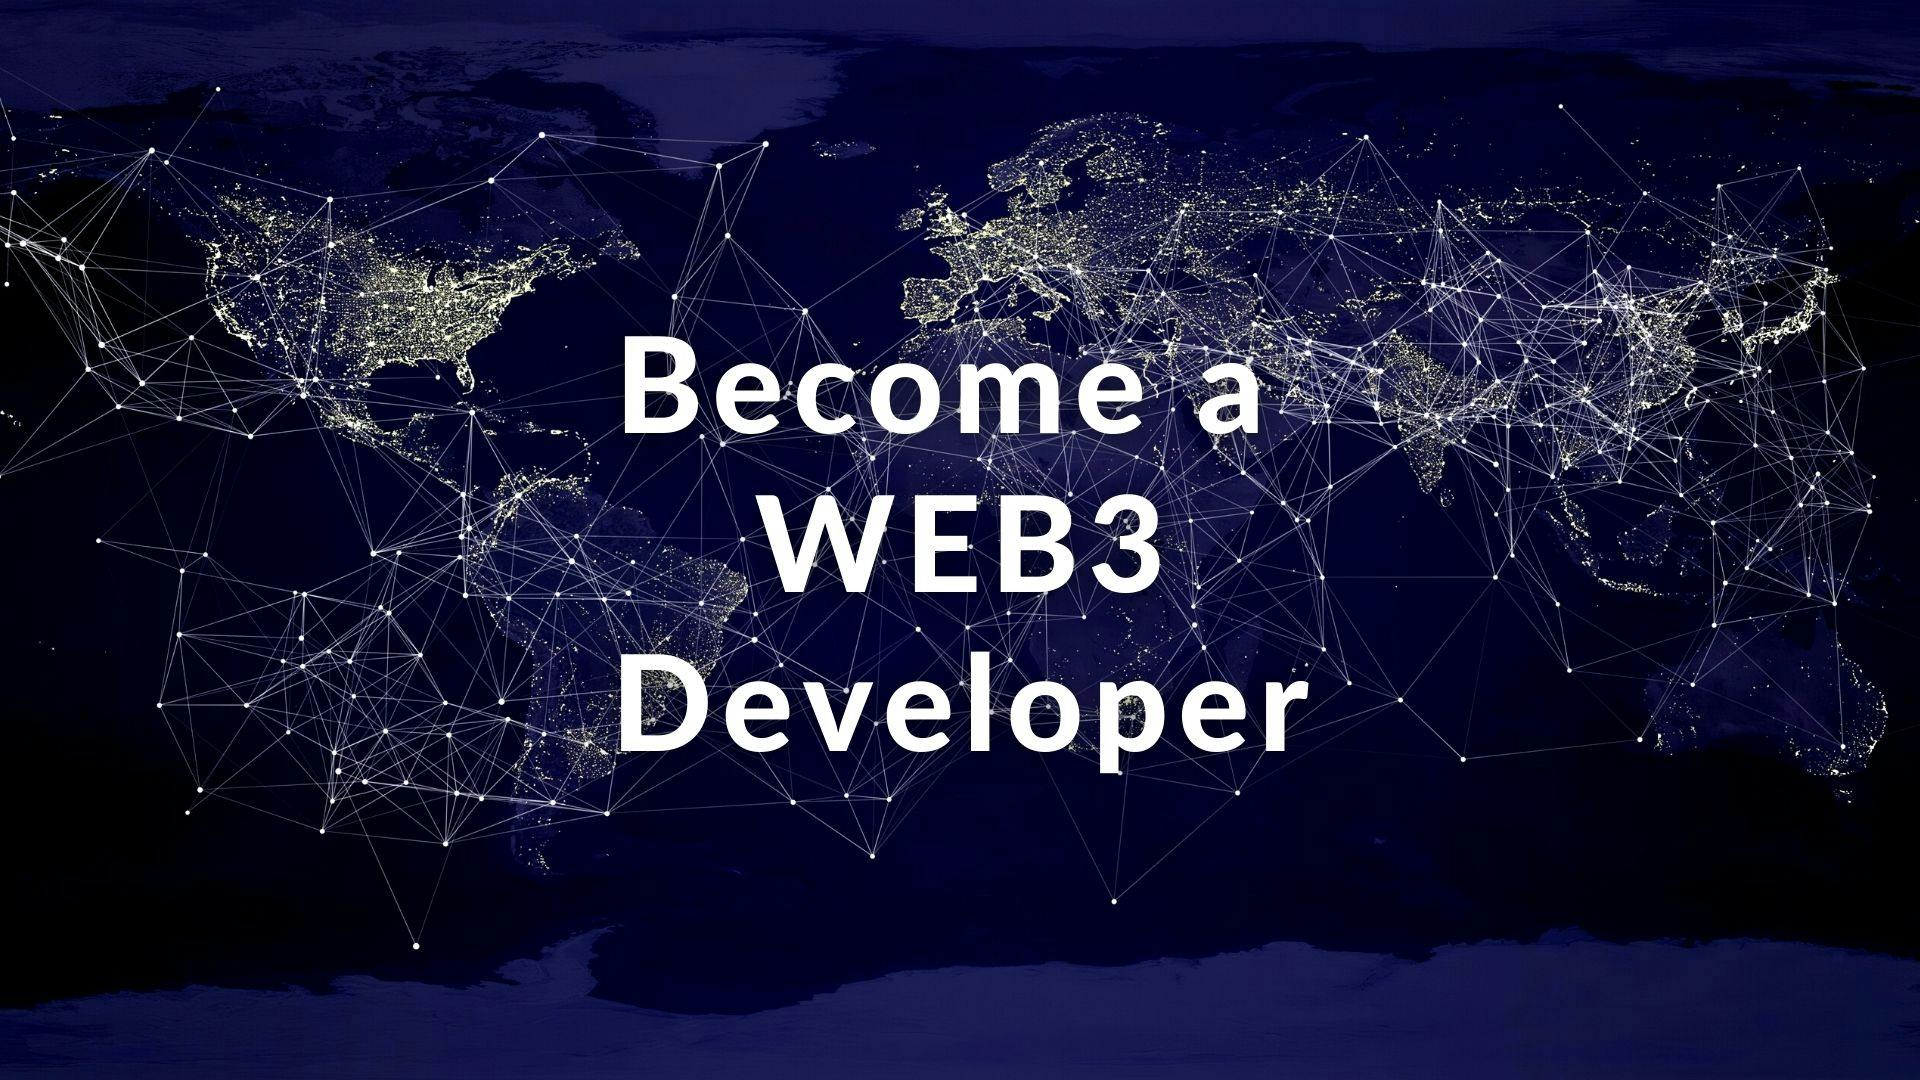 Best Roadmap and Free Resources to become a Web3 developer